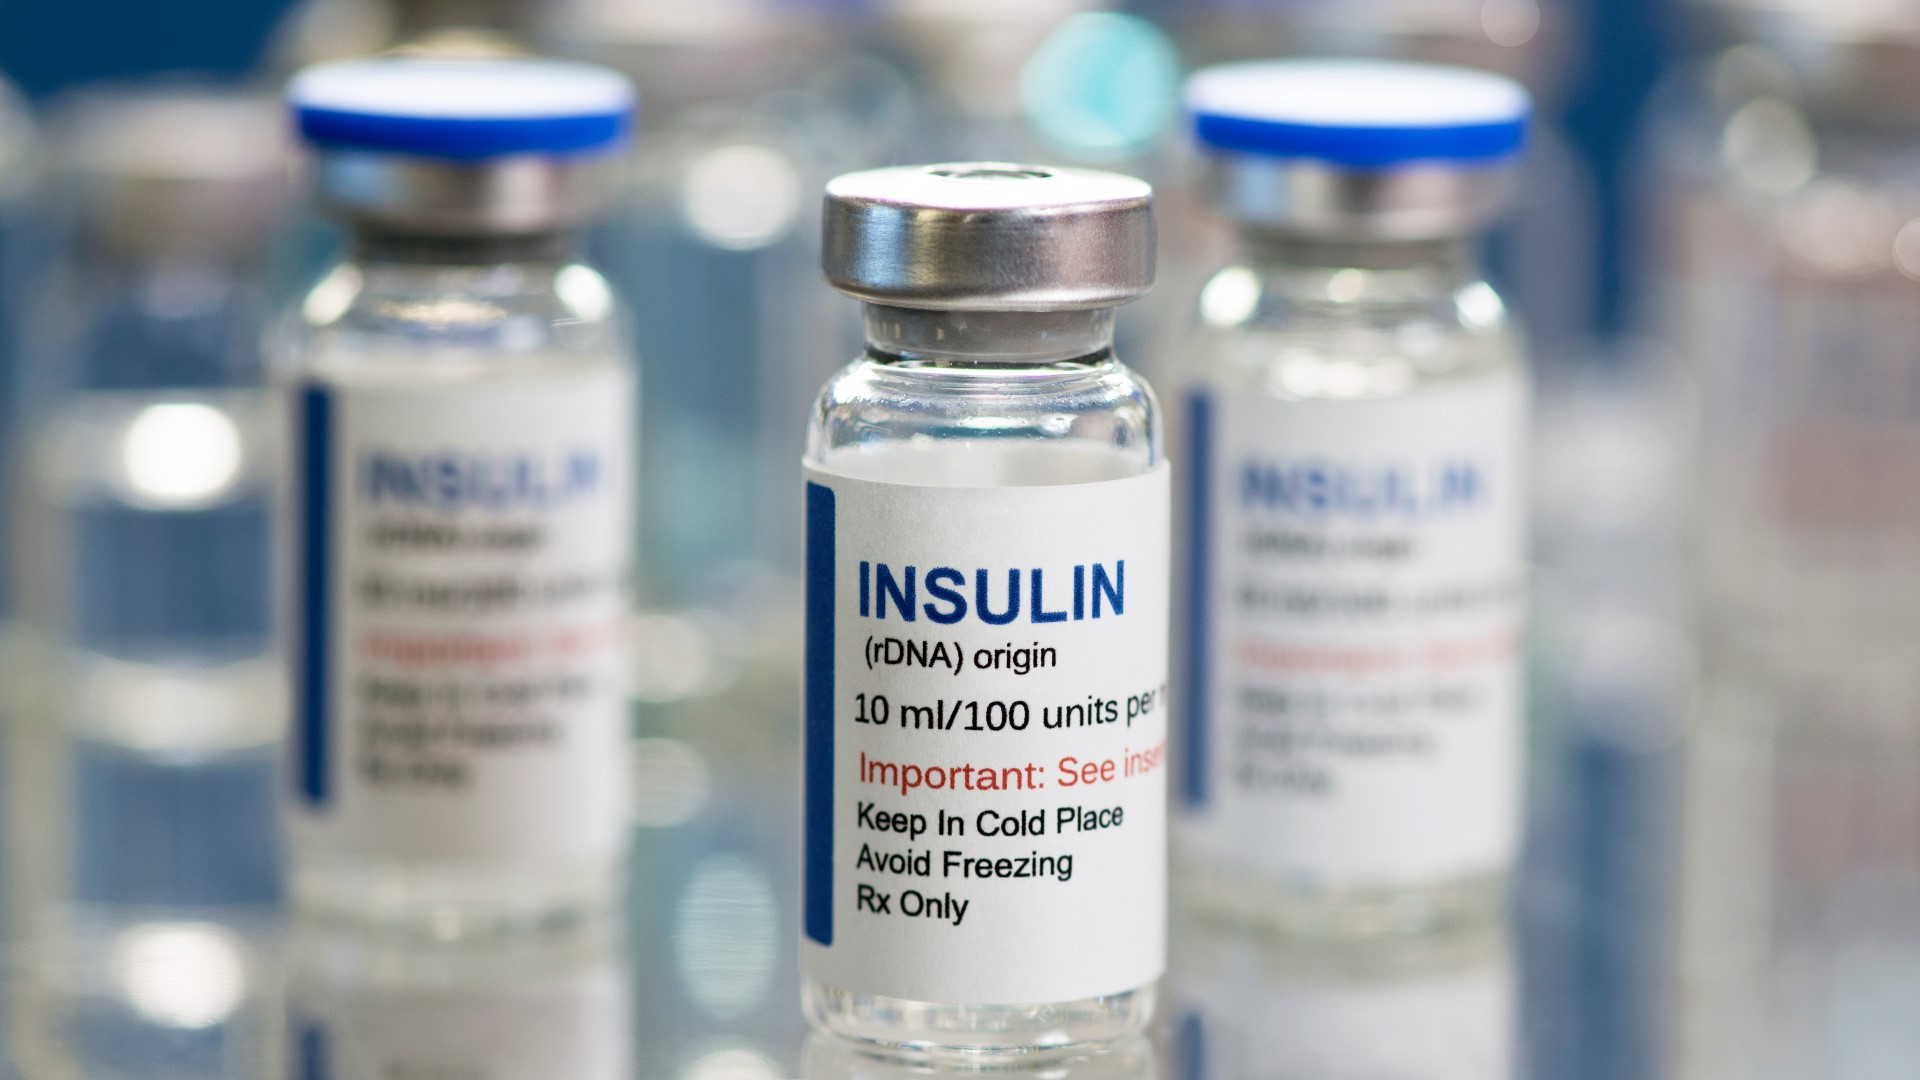 Gov. Gavin Newsom says the intent is to disrupt the insulin marketplace, where prices have steadily climbed in recent decades.